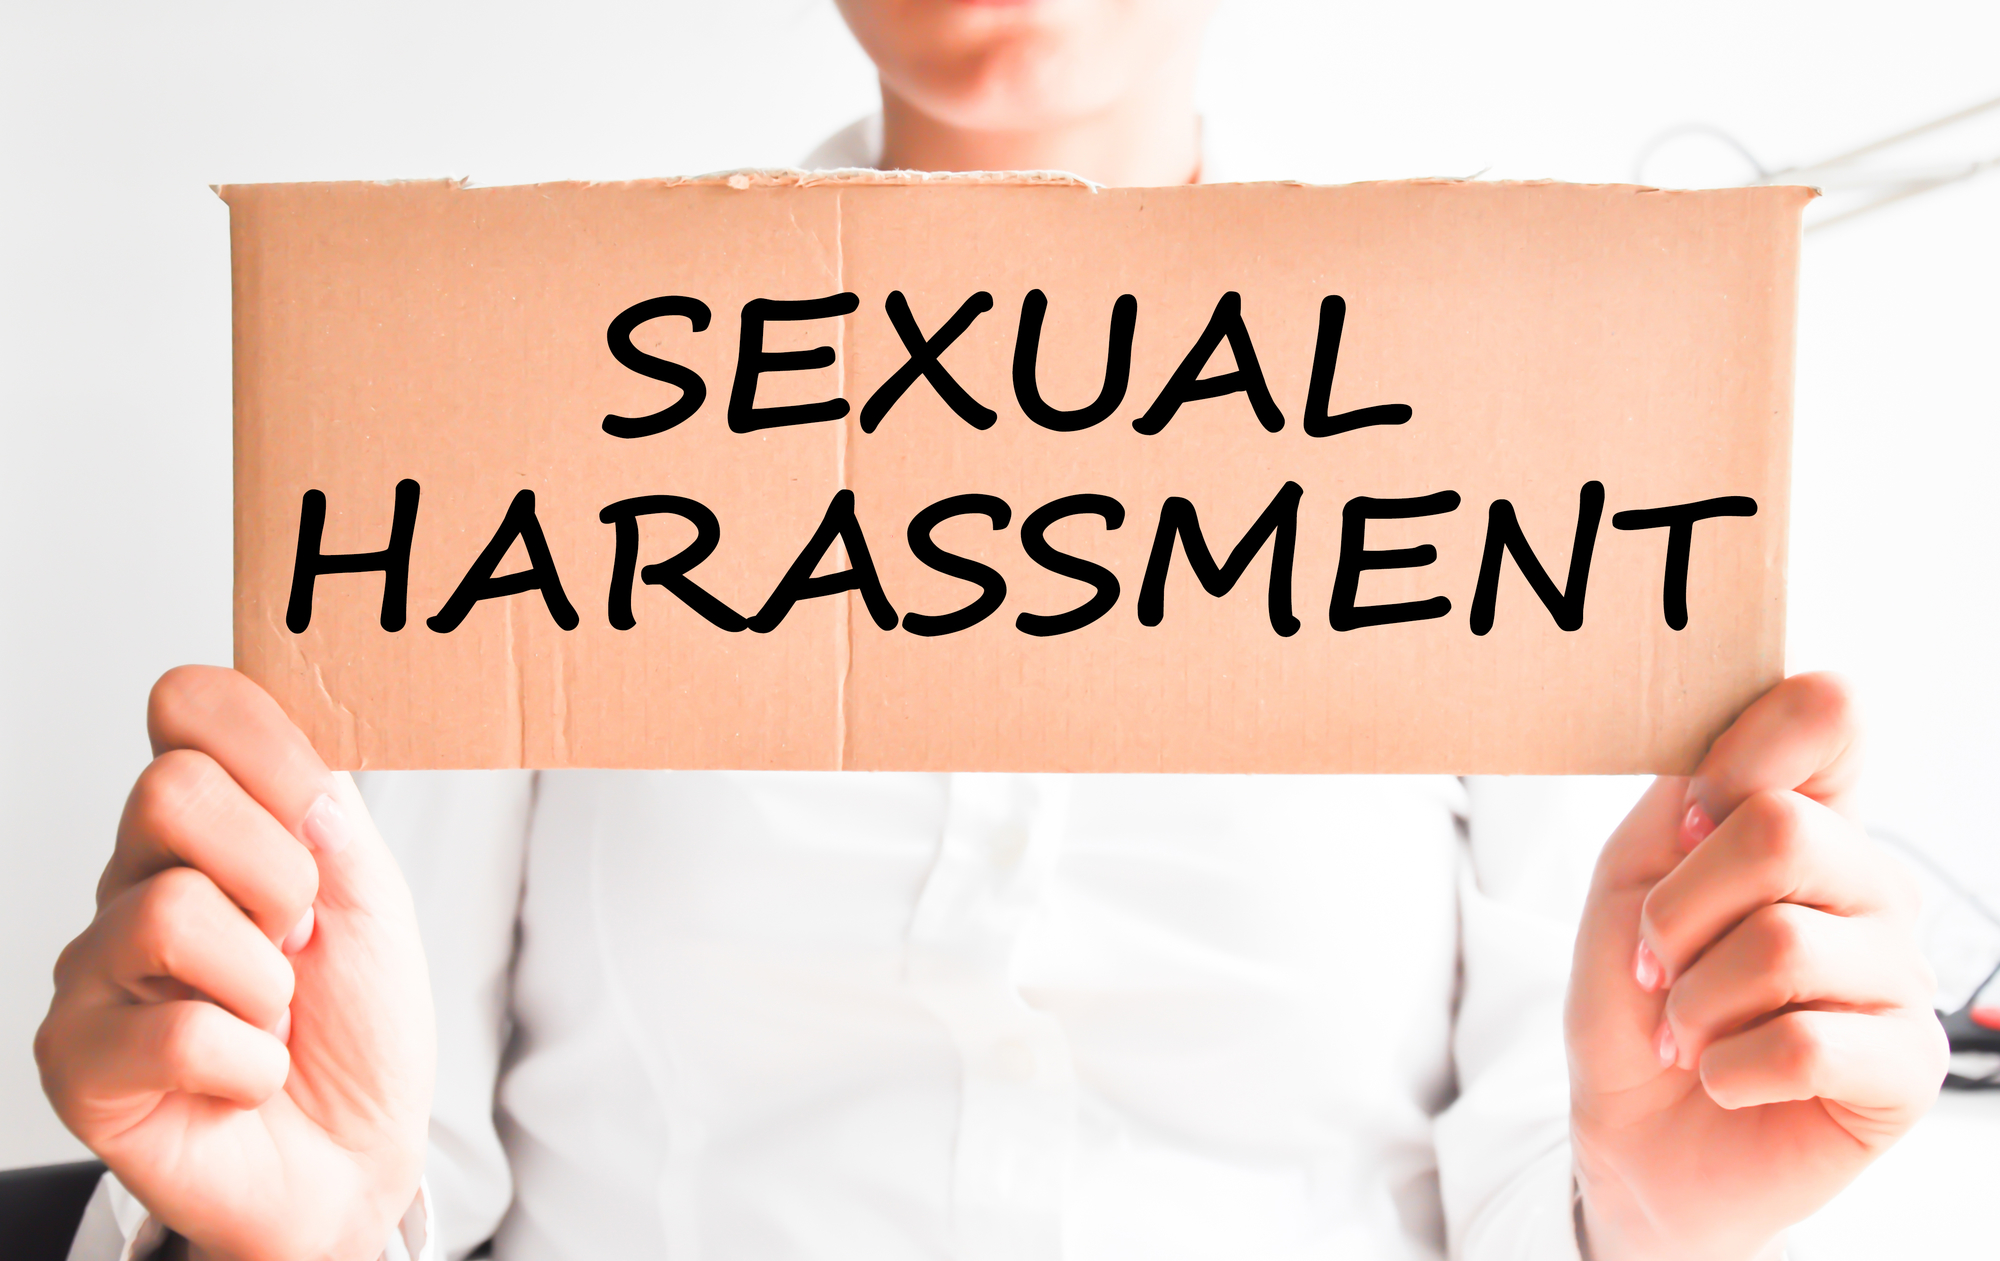 Sexual Harassment Relationship Therapy And Relationship Advice For Couples And Singles By Dr